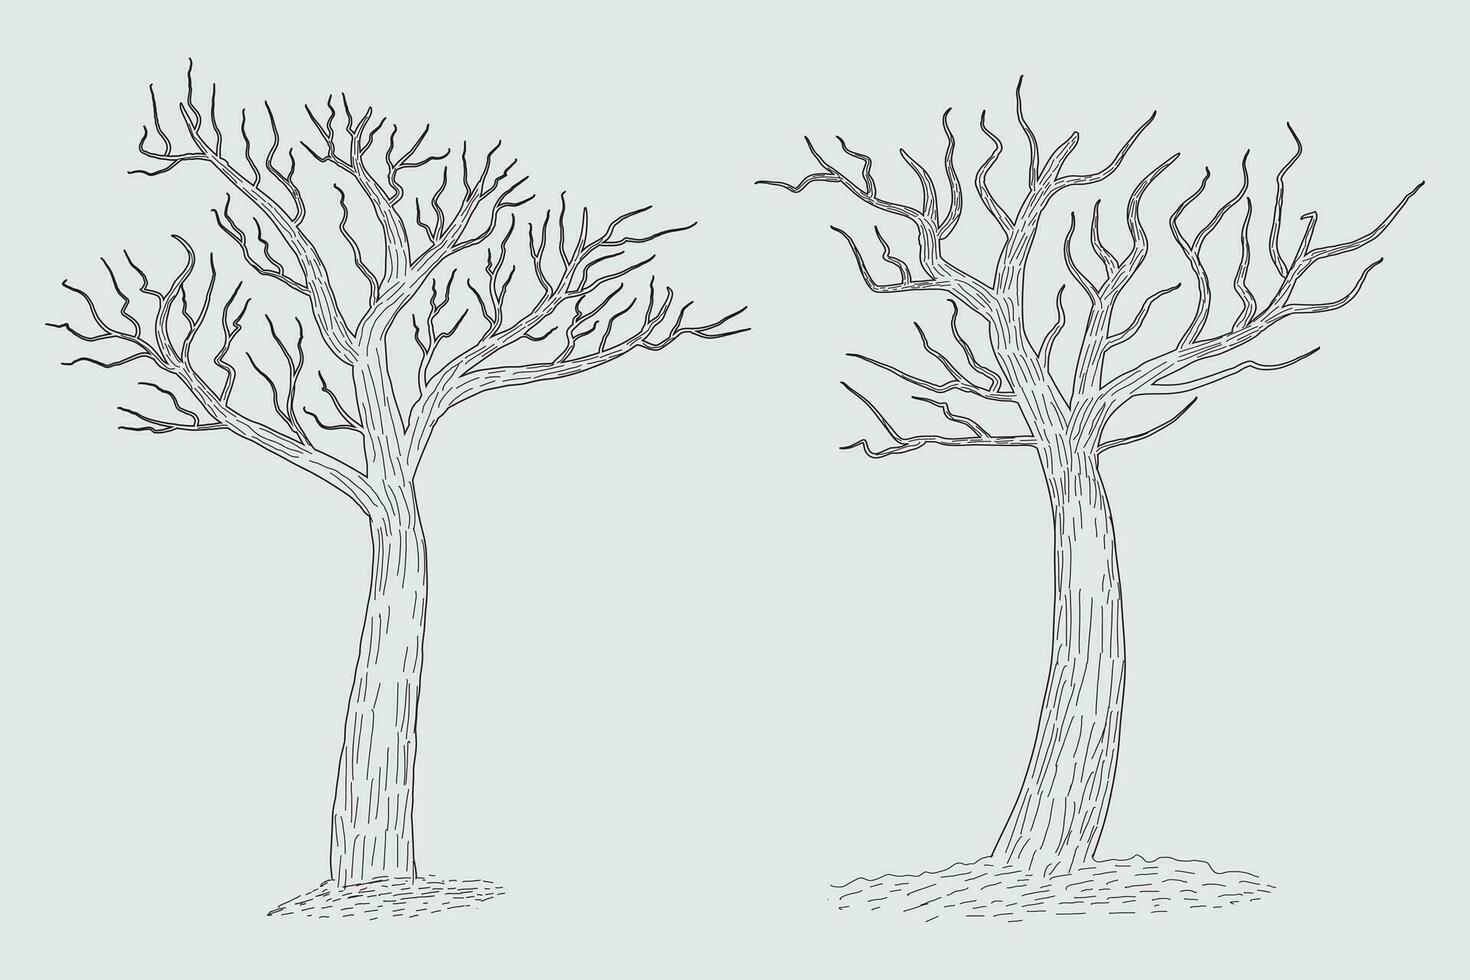 Hand drawn winter Bare Tree Sketch vector, bare Trees Leafless dead old dry No leaves pencil sketch illustration, Winter Naked Branch without leave Dead tree drawing Coloring Page nature forest icon vector